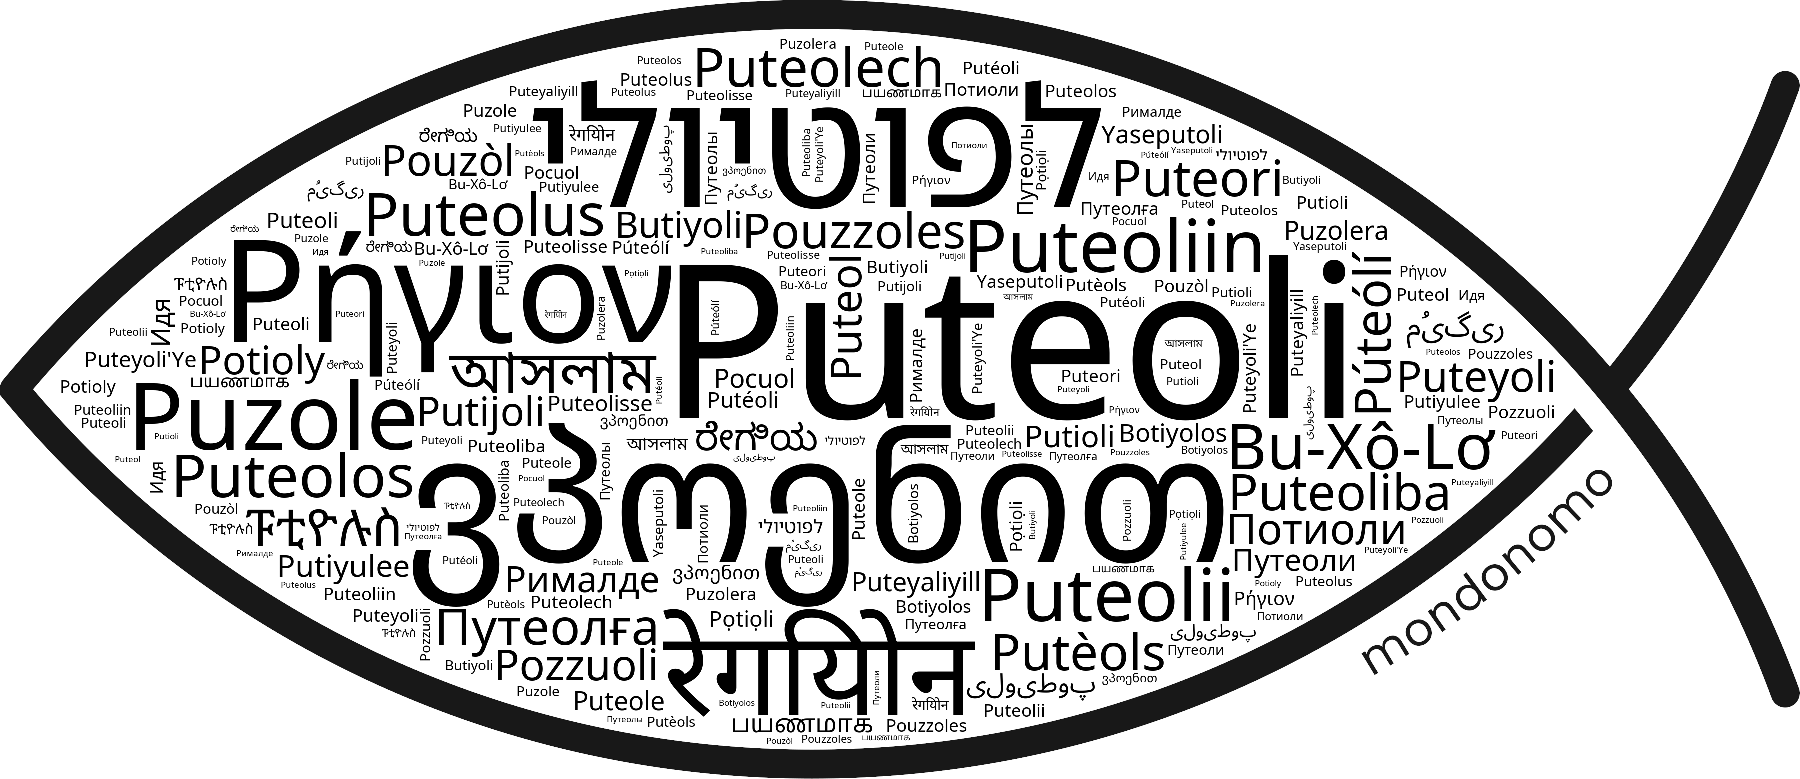 Name Puteoli in the world's Bibles